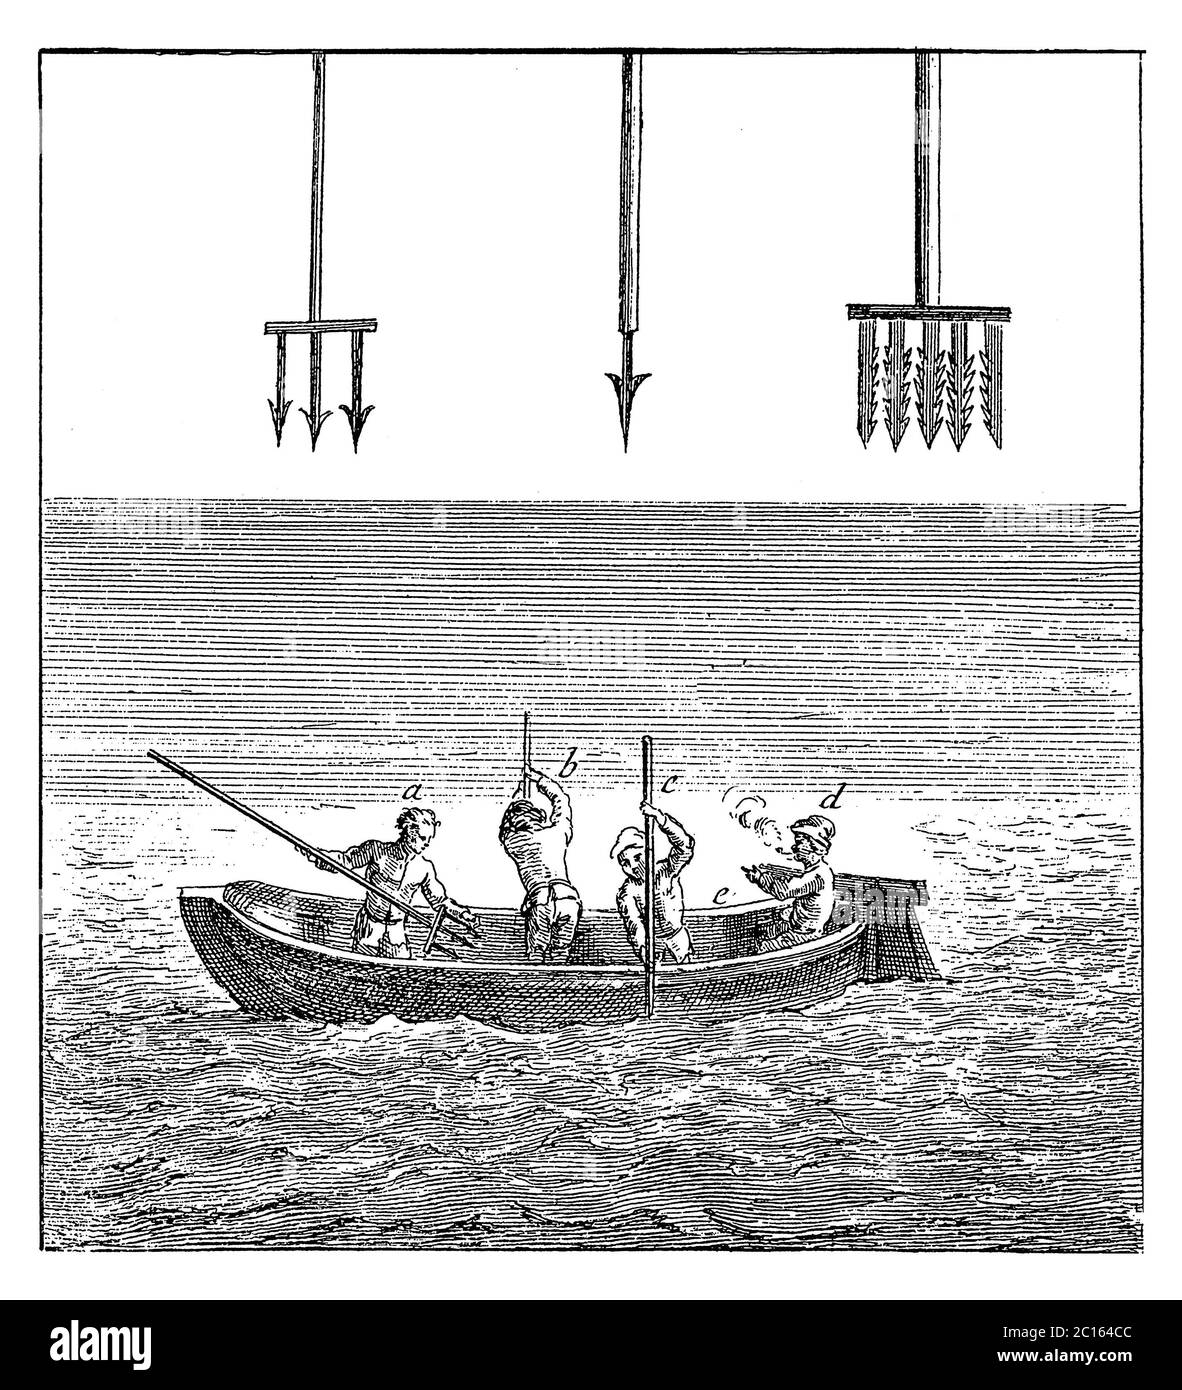 18th century illustration of trident used for spearing fish